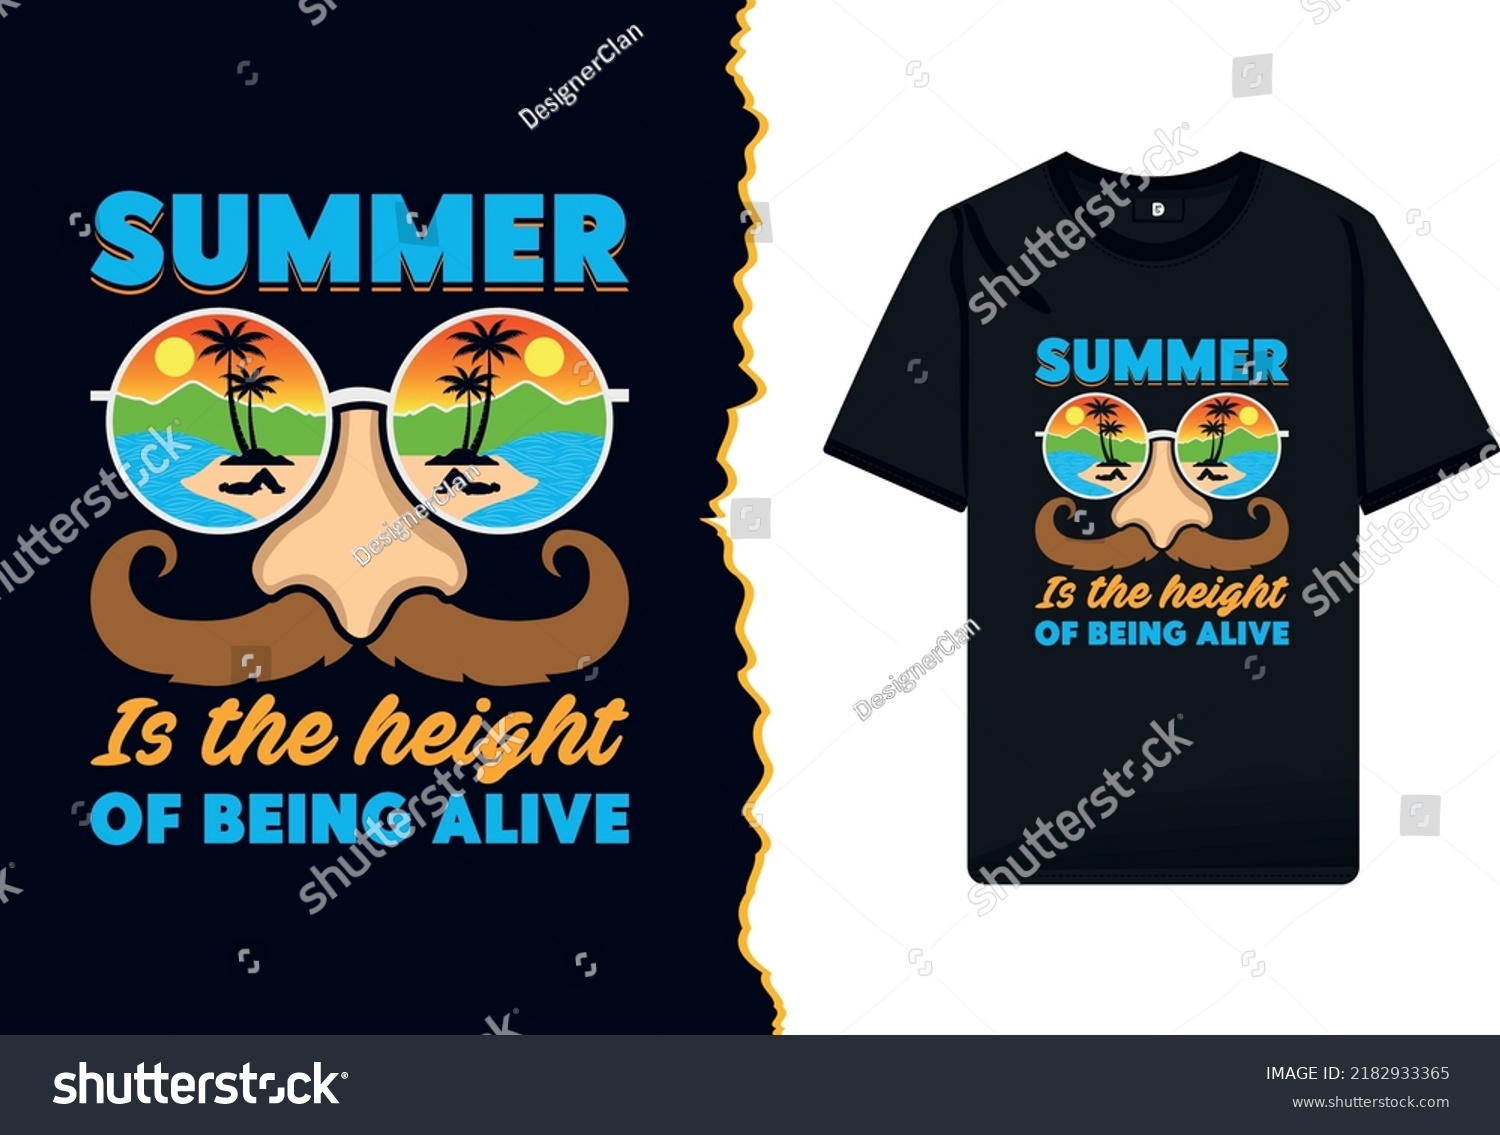 SVG of summer season vector t-shirt design with sunglass illustration. Vacation typography arts and retro colorful shirt template. svg